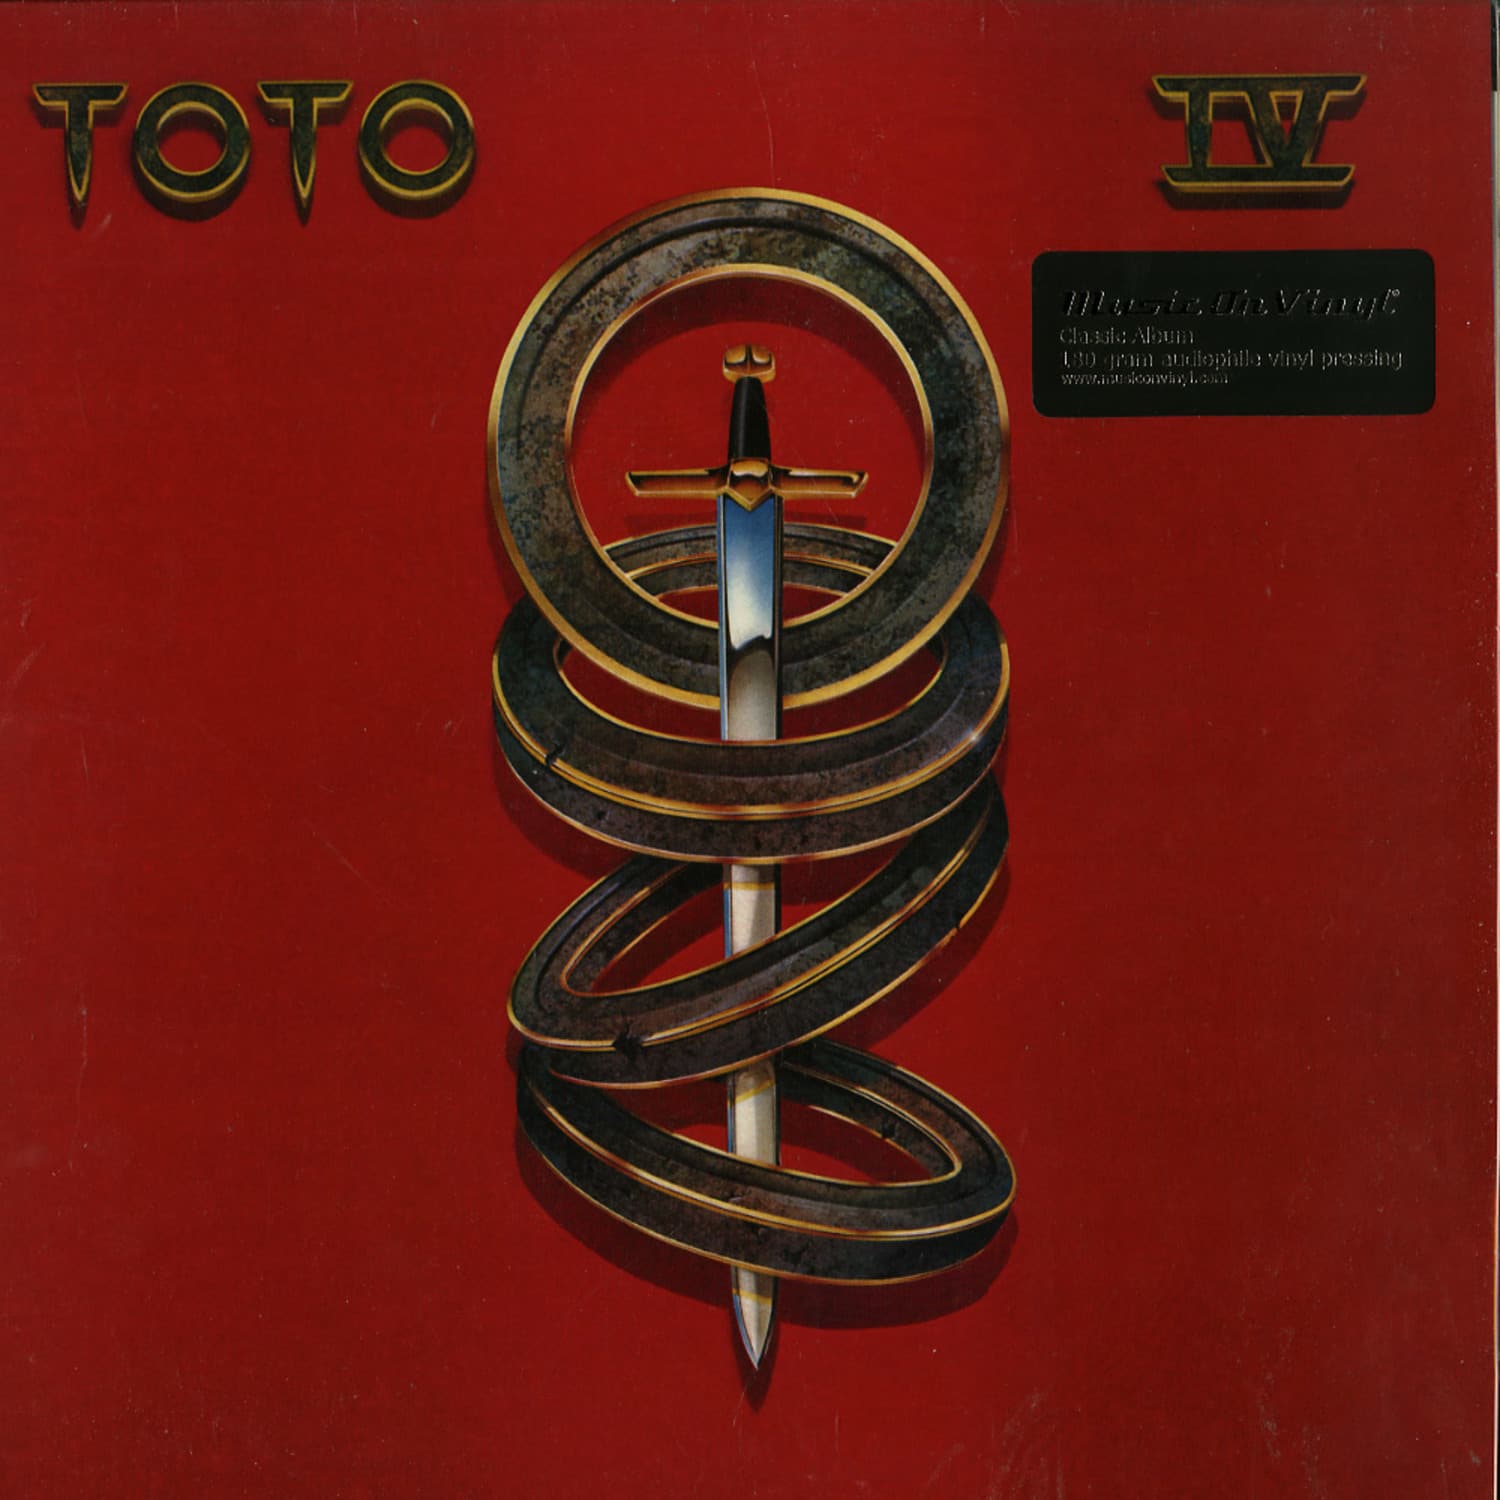 Toto - IV 